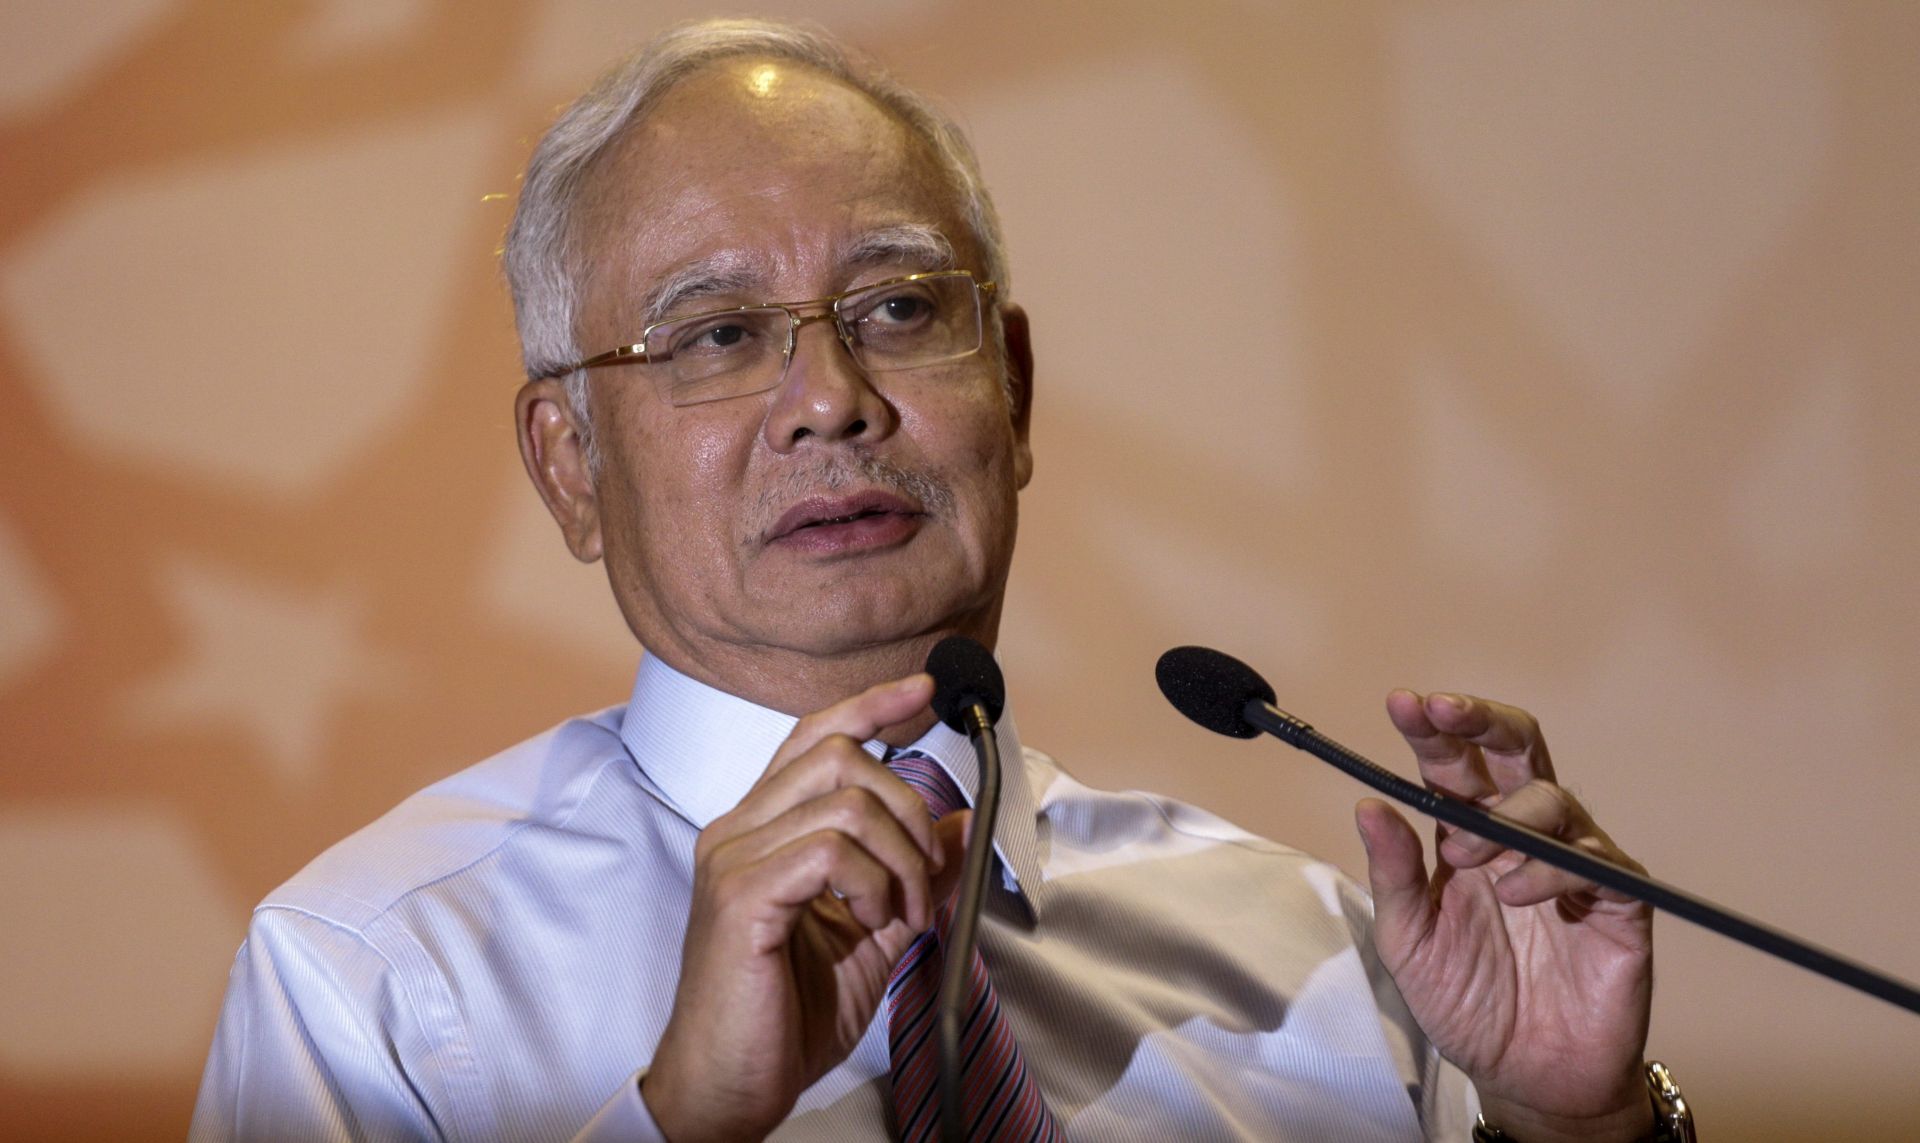 epa05226764 (FILE A file photograph showing Malaysian Prime Minister, Najib Razak as he prepare to deliver his speech during an event in Kuala Lumpur, Malaysia, 14 March 2016. Media reports on 23 March 2016 state that Mahathir Mohamad is to sue Malaysian Prime Minister Najib Razak for alleged corruption in public office.  EPA/AHMAD YUSNI